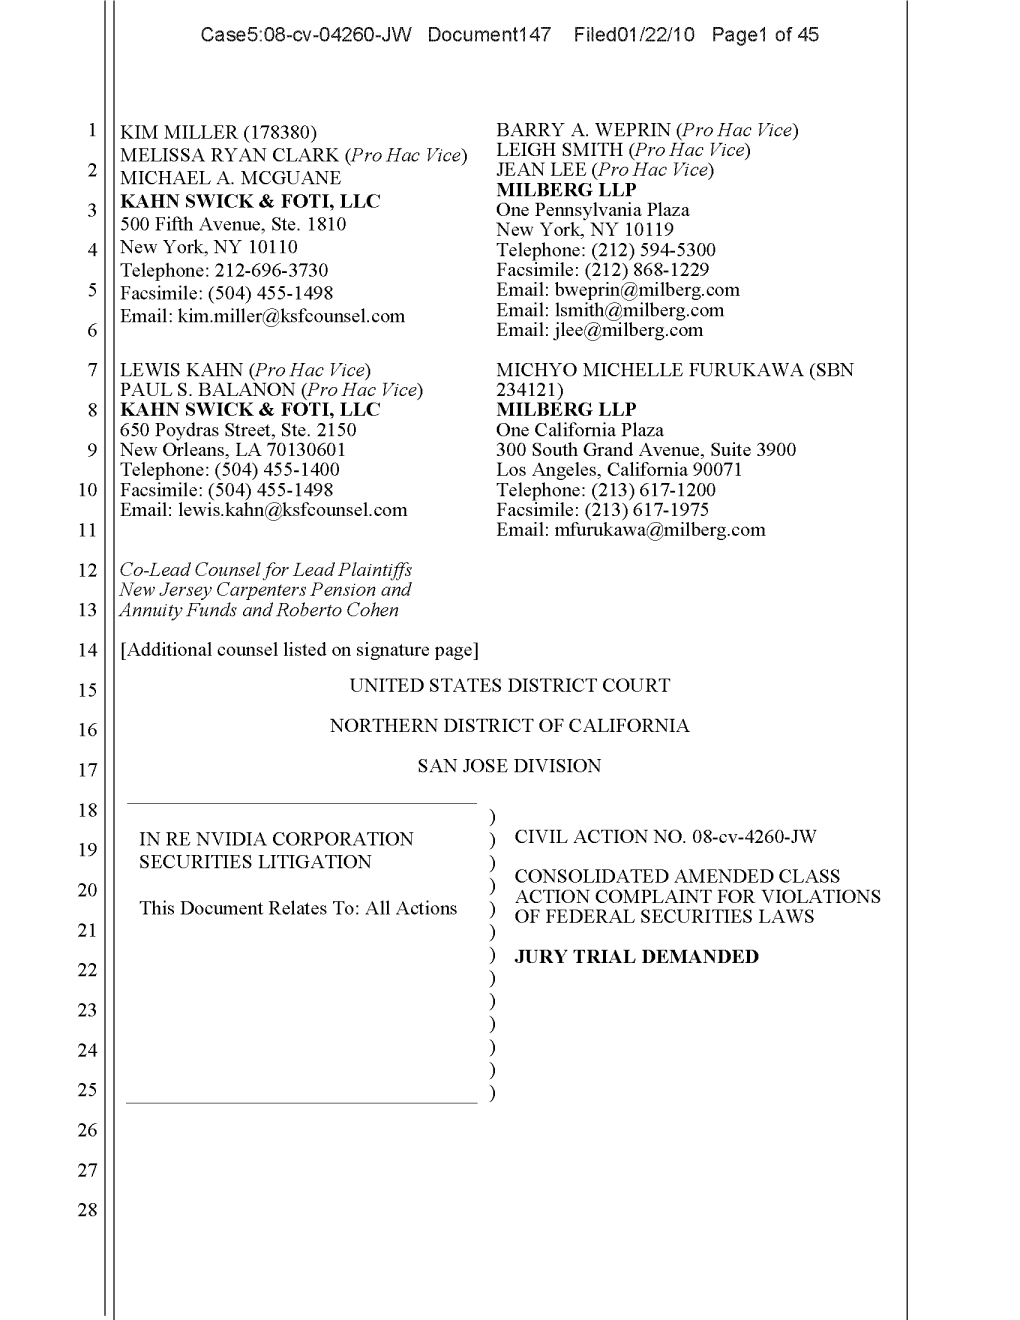 In Re Nvidia Corporation Securities Litigation 08-CV-04260-Consolidated Amended Class Action Complaint for Violations of Federal